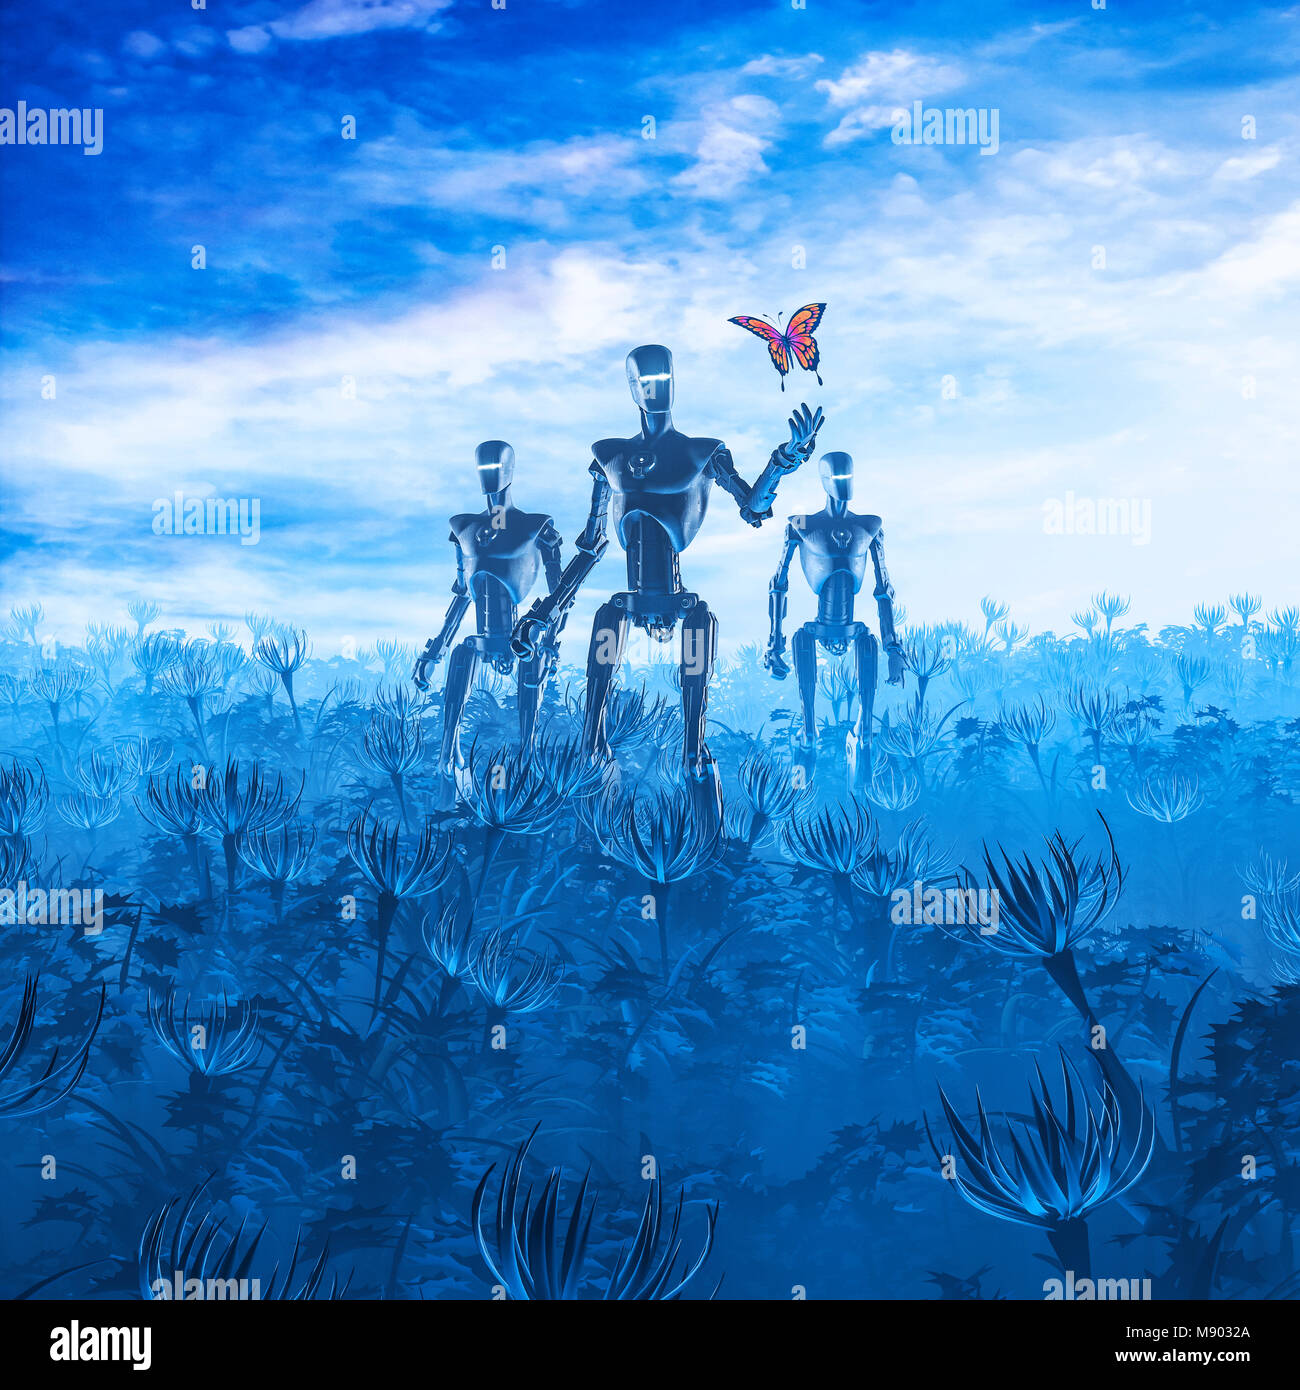 Tech meets nature / 3D illustration of androids in alien landscape finding butterfly Stock Photo